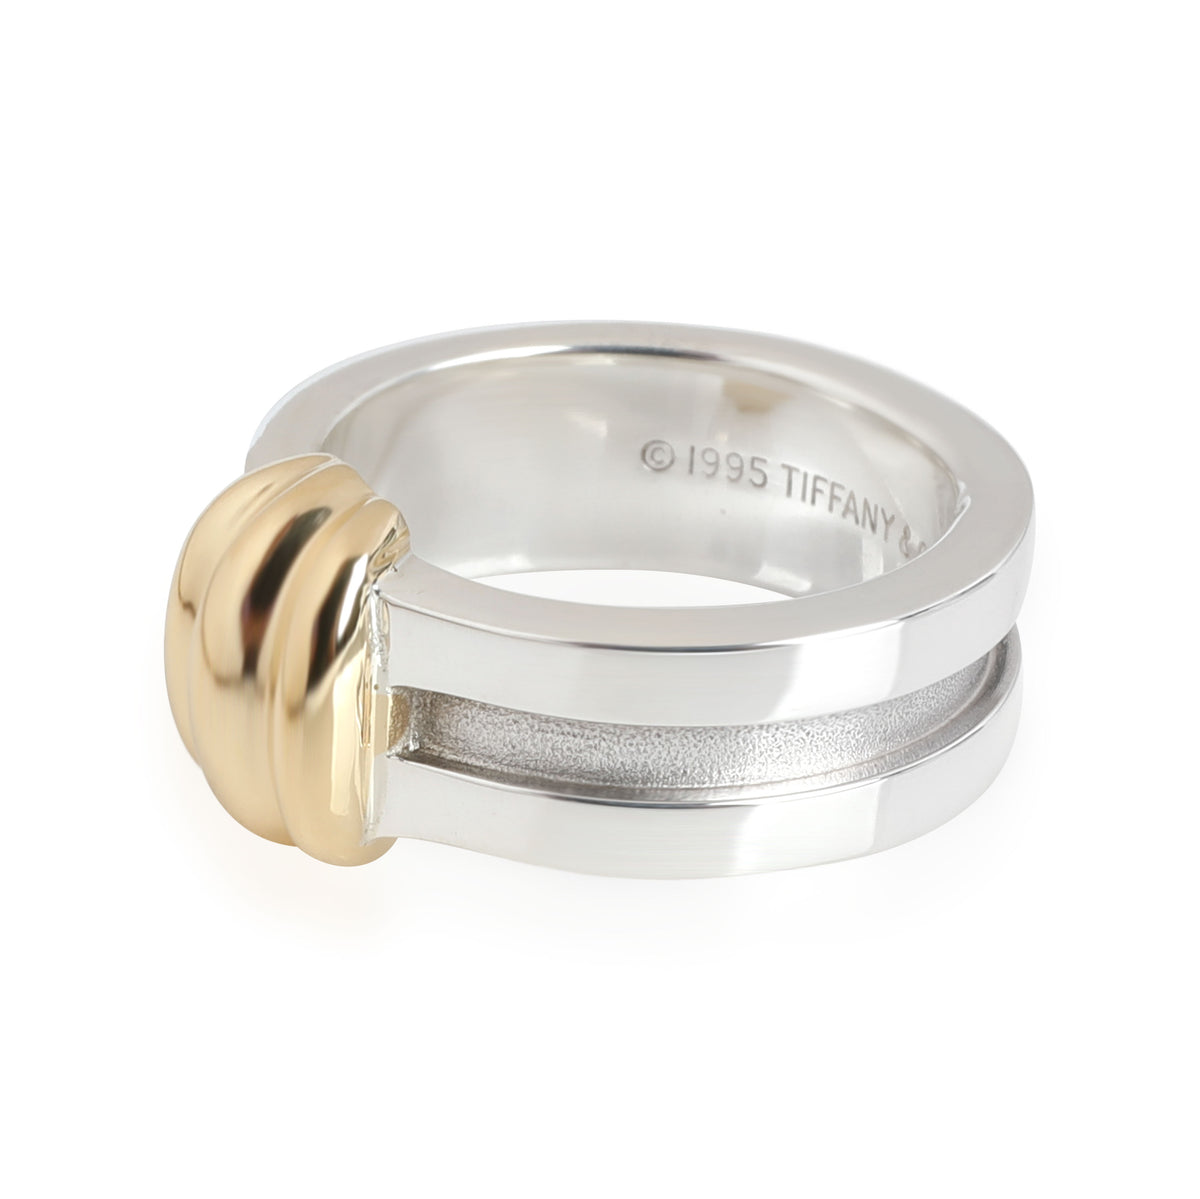 Tiffany & Co. Band in 18K Yellow Gold/Sterling Silver